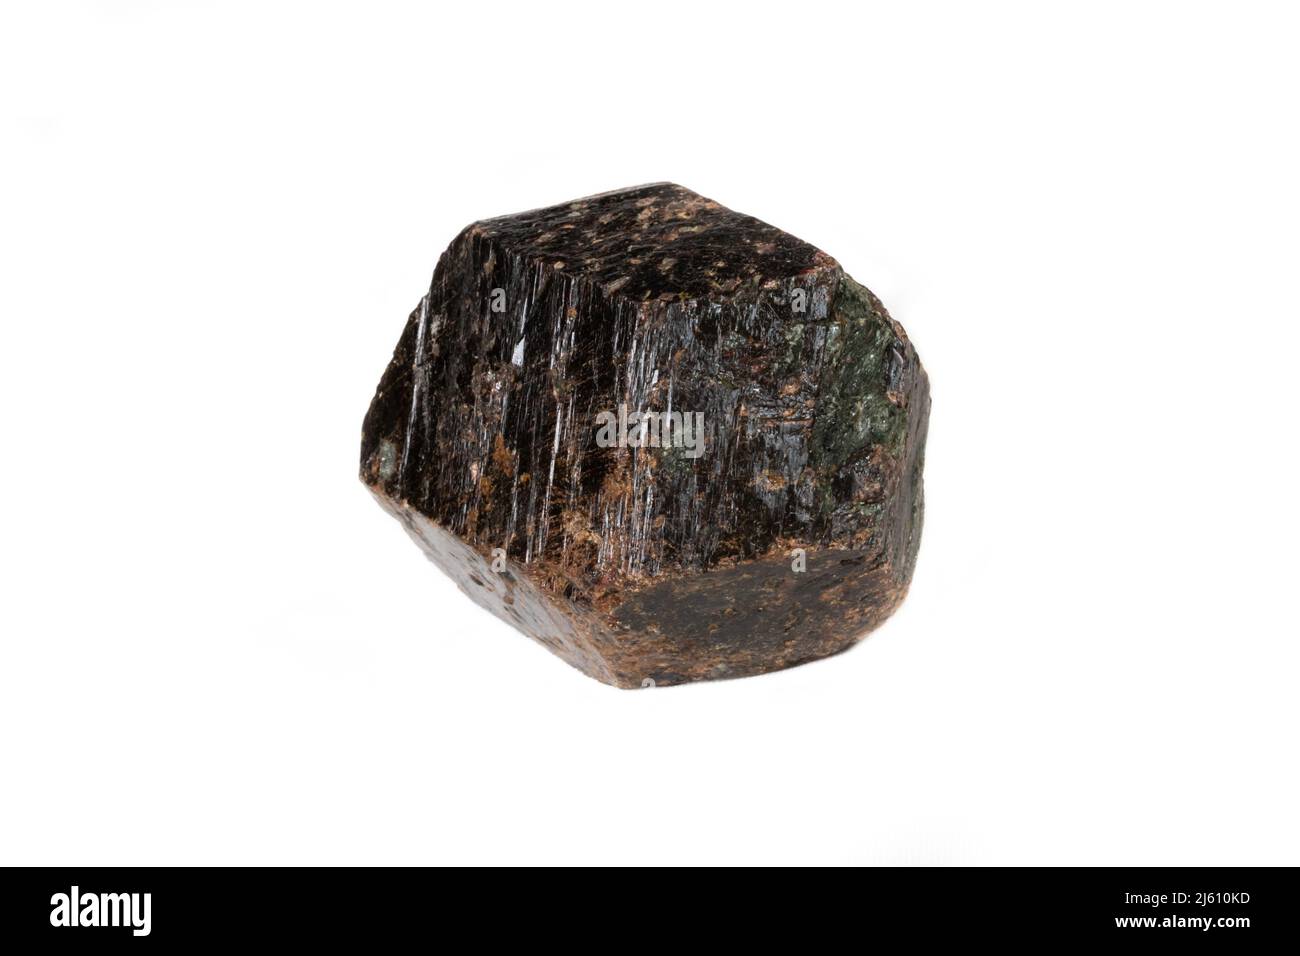 Massive raw garnet from Australia. Uncut; weight 720 grams (3,600 carats) Photographed on white background. Stock Photo